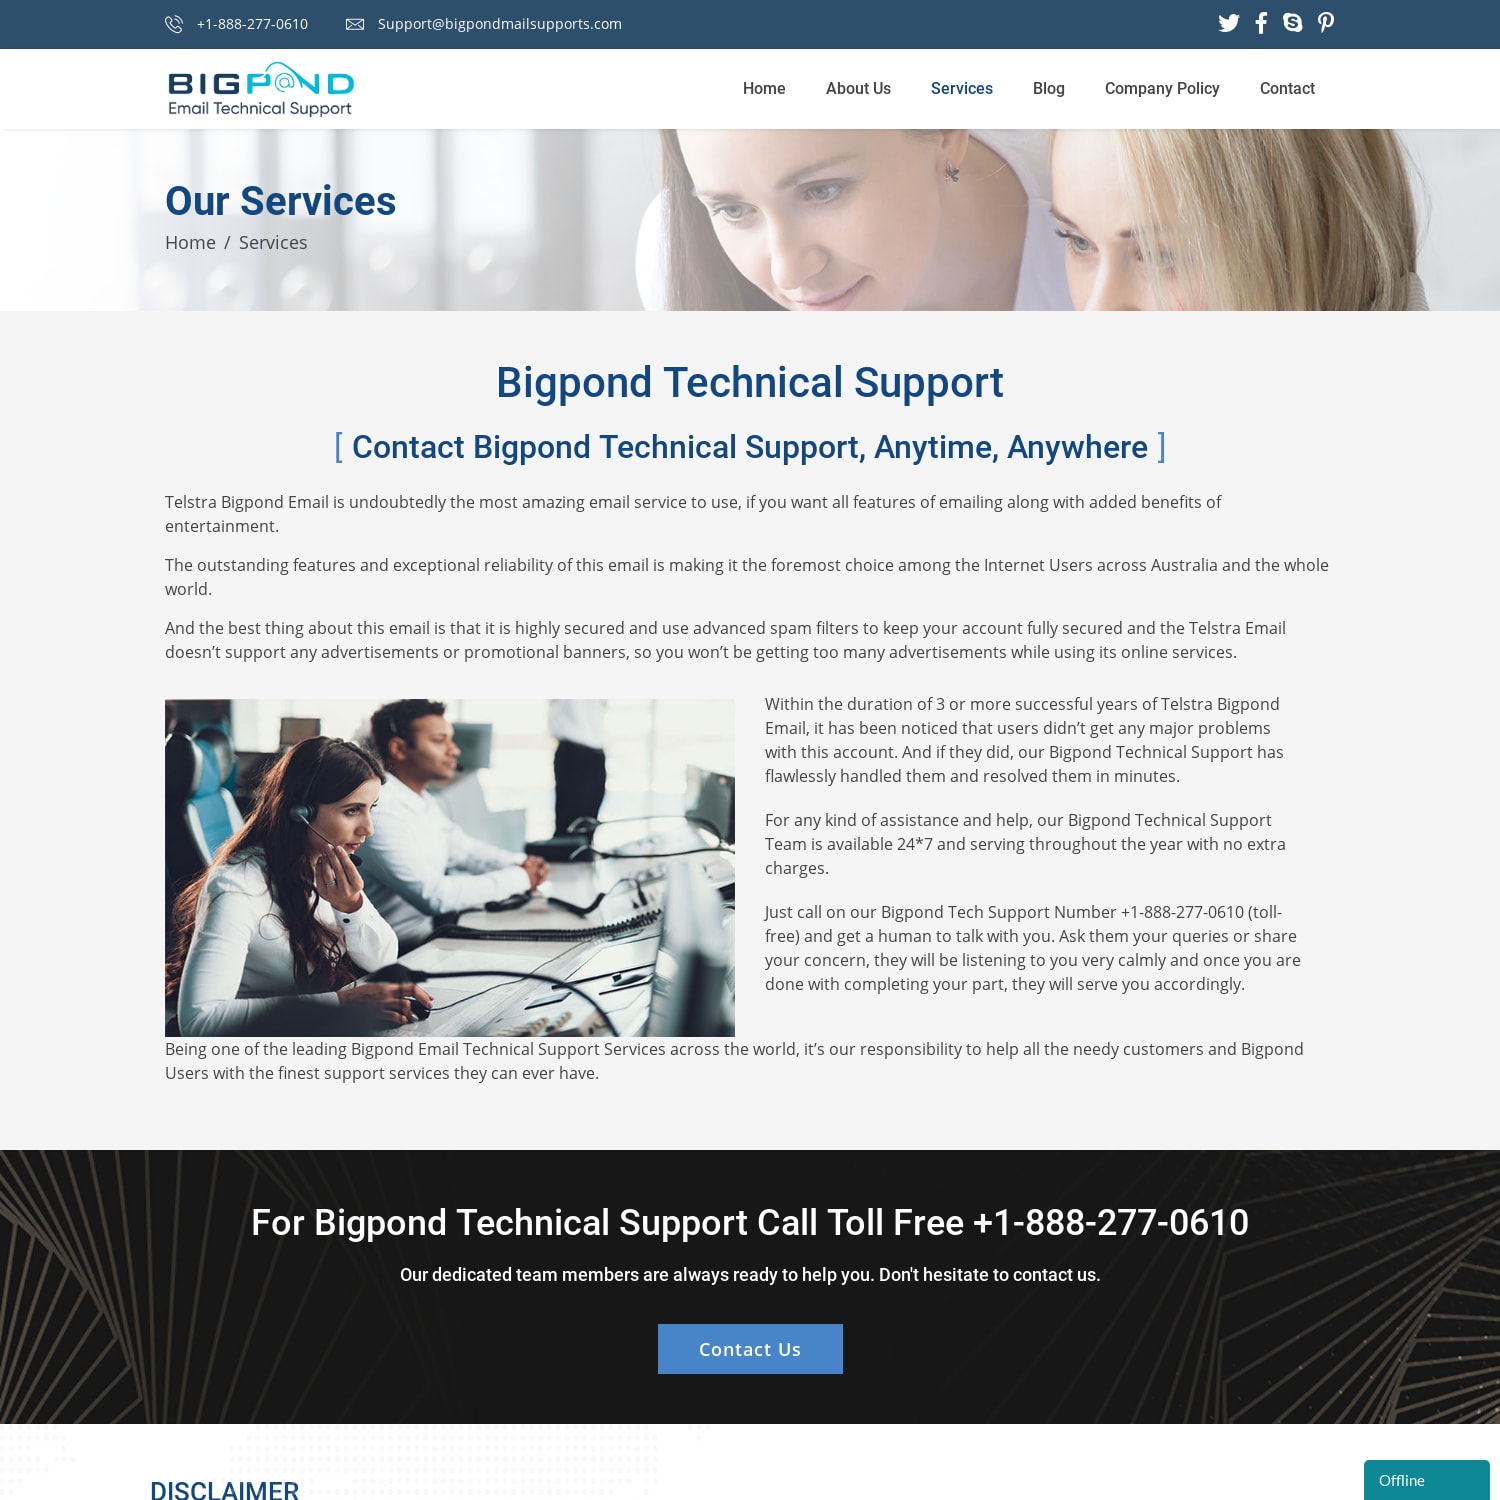 Bigpond Email Technical Support +1-888-277-0610 Toll Free Number